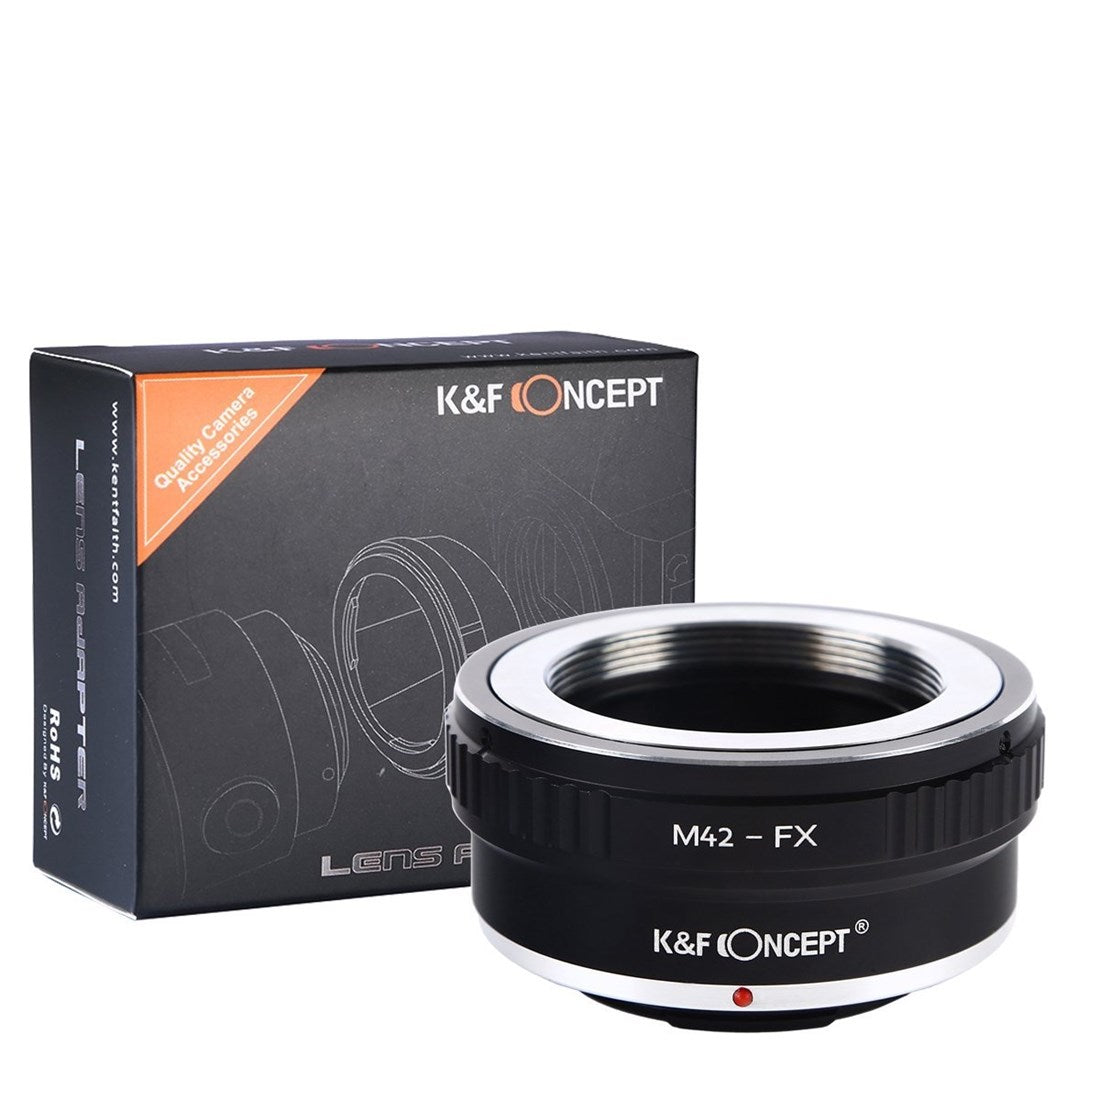 Product Image of K&F Concept M42 42mm Screw to Fuji Fujifilm FX XPro1 X-Pro1 Lens Mount Adapter Ring K&F Concept Lens Adapter KF06.058